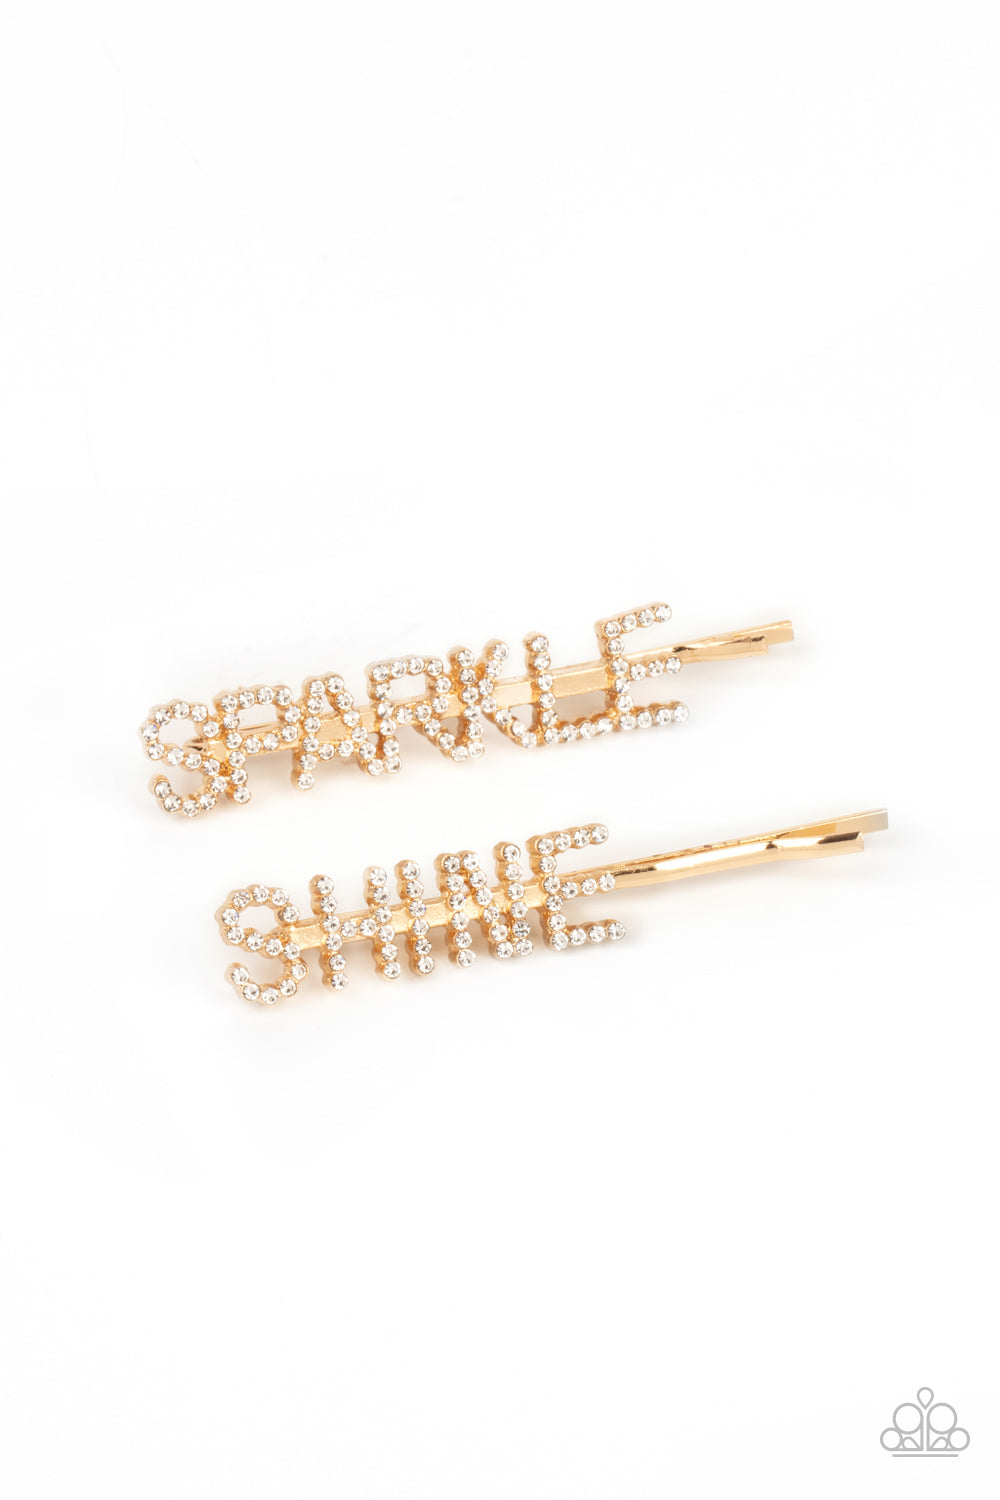 Center of the SPARKLE-verse Gold Hair Clip - Paparazzi Accessories  Glassy white rhinestones spell out "Sparkle," and "Shine," across the fronts of two gold bobby pins, creating a sparkly duo.  Sold as one pair of decorative bobby pins.